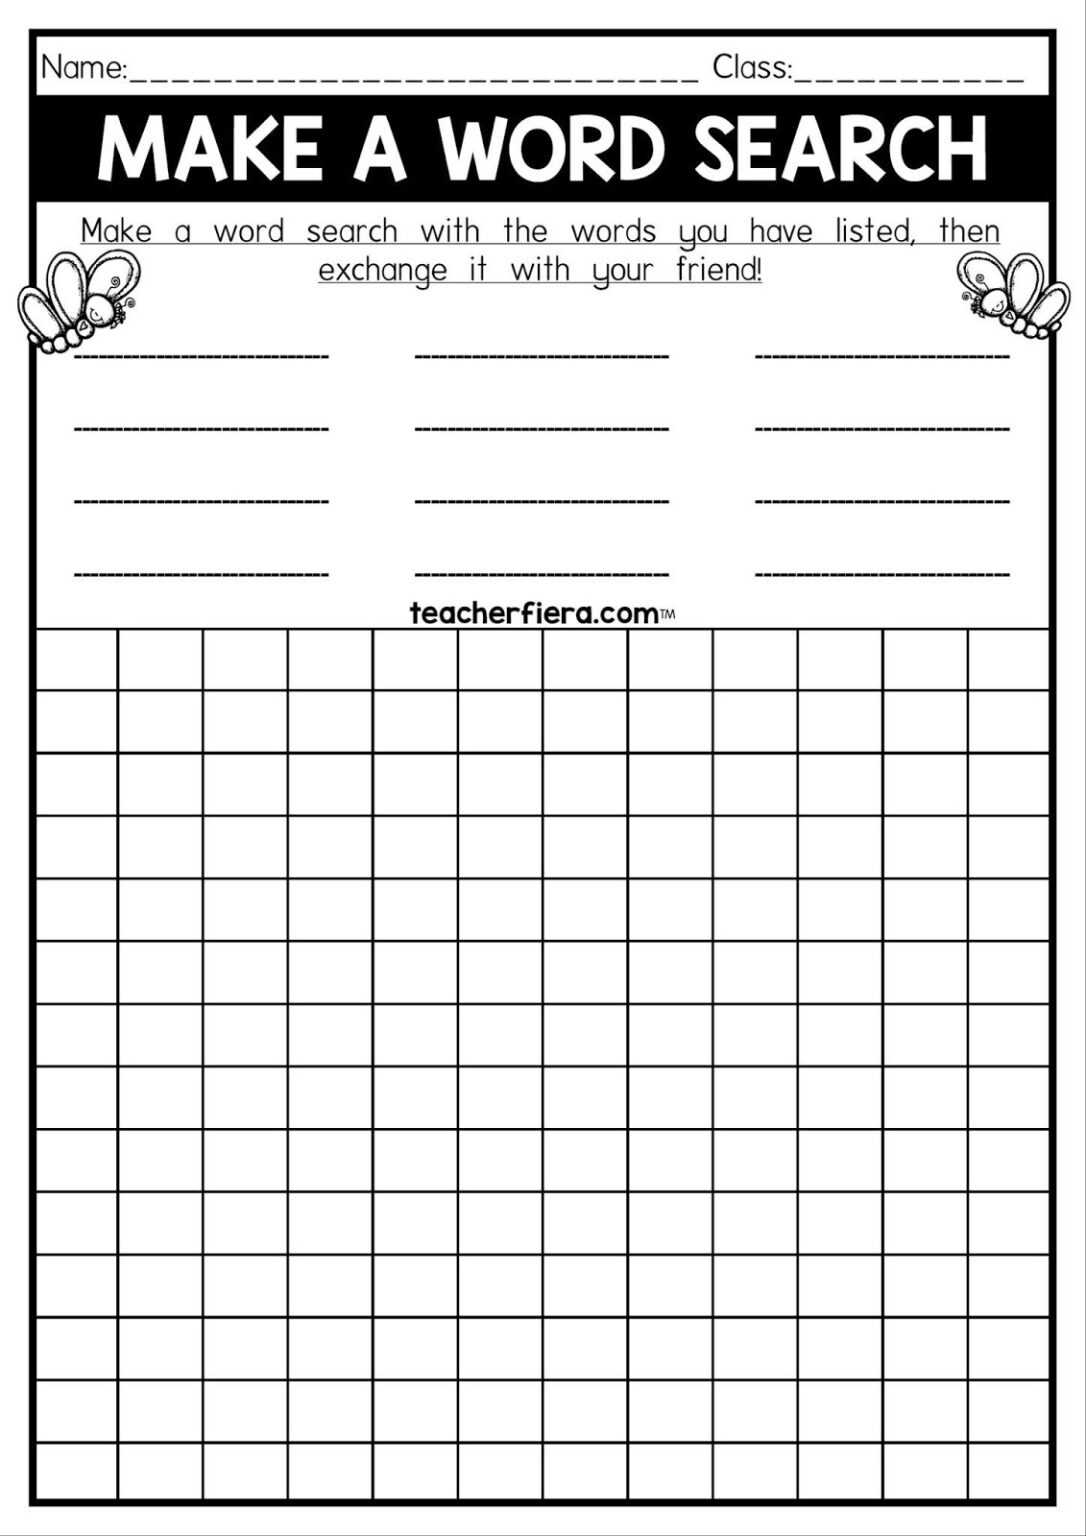 template-for-word-search-printable-schedule-template-blank-wordsearch